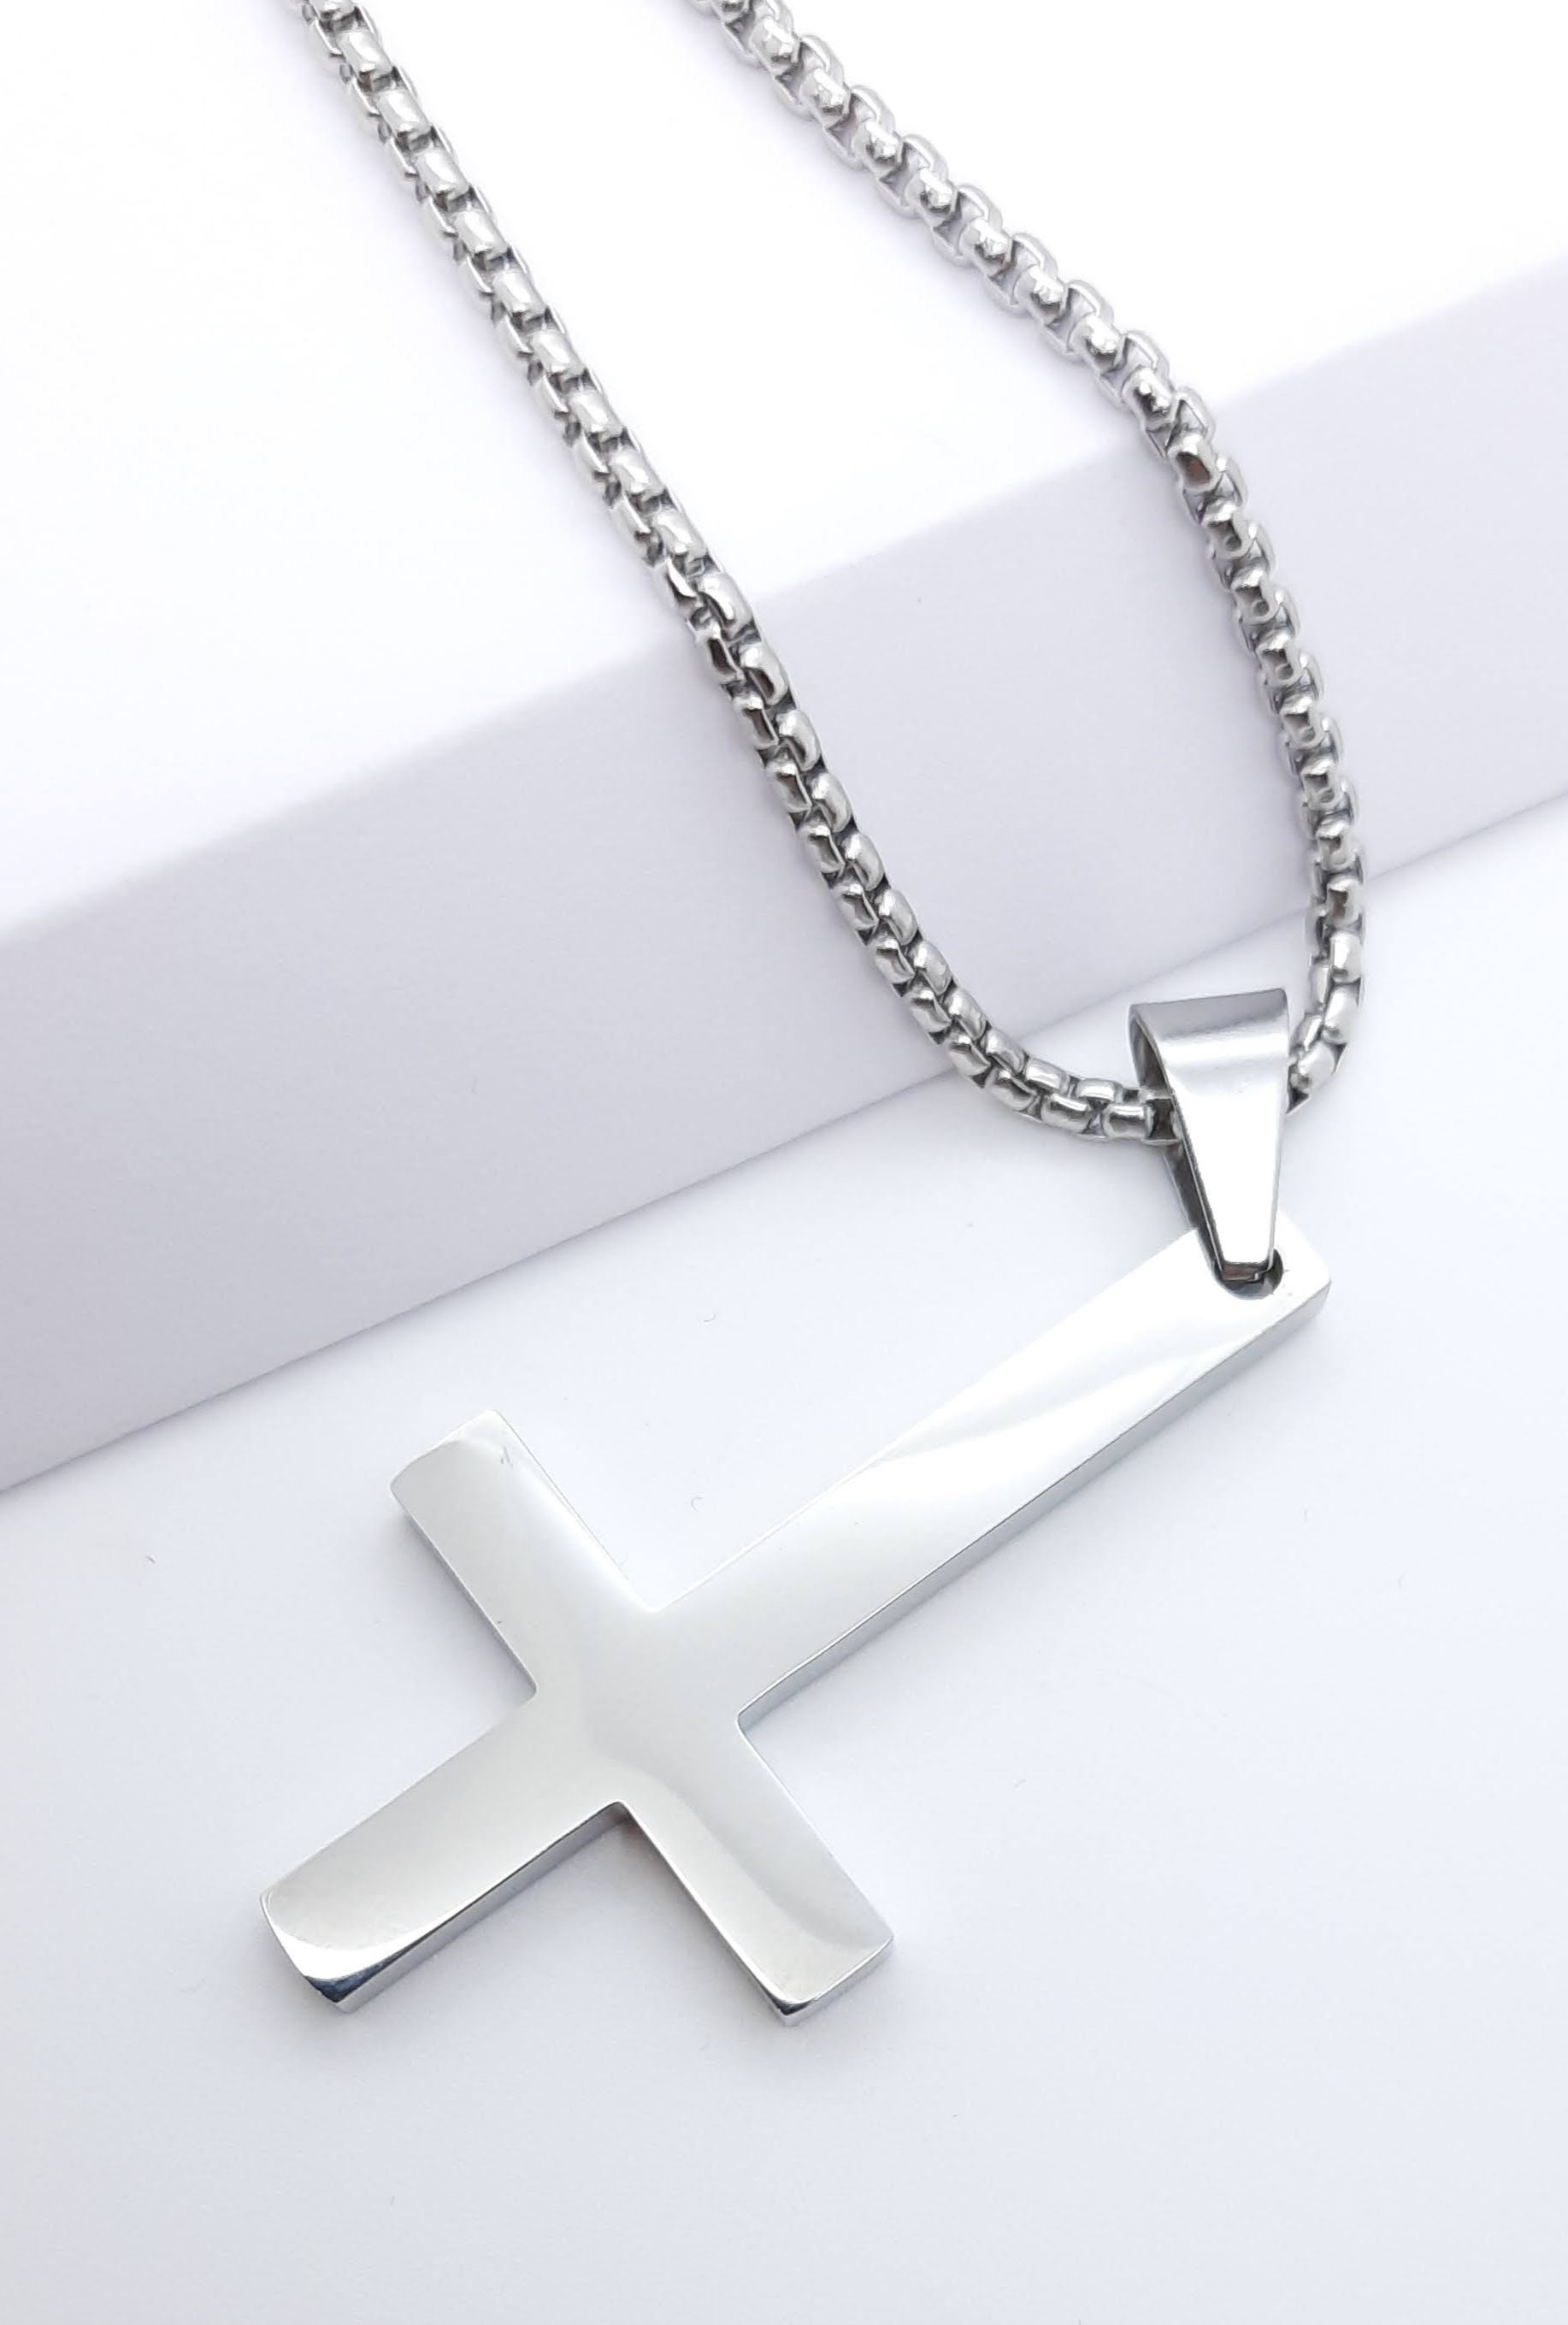 Buy PJ Stainless Steel Upside Down St.Peter's Cross Necklace Inverted Cross  Pendant at